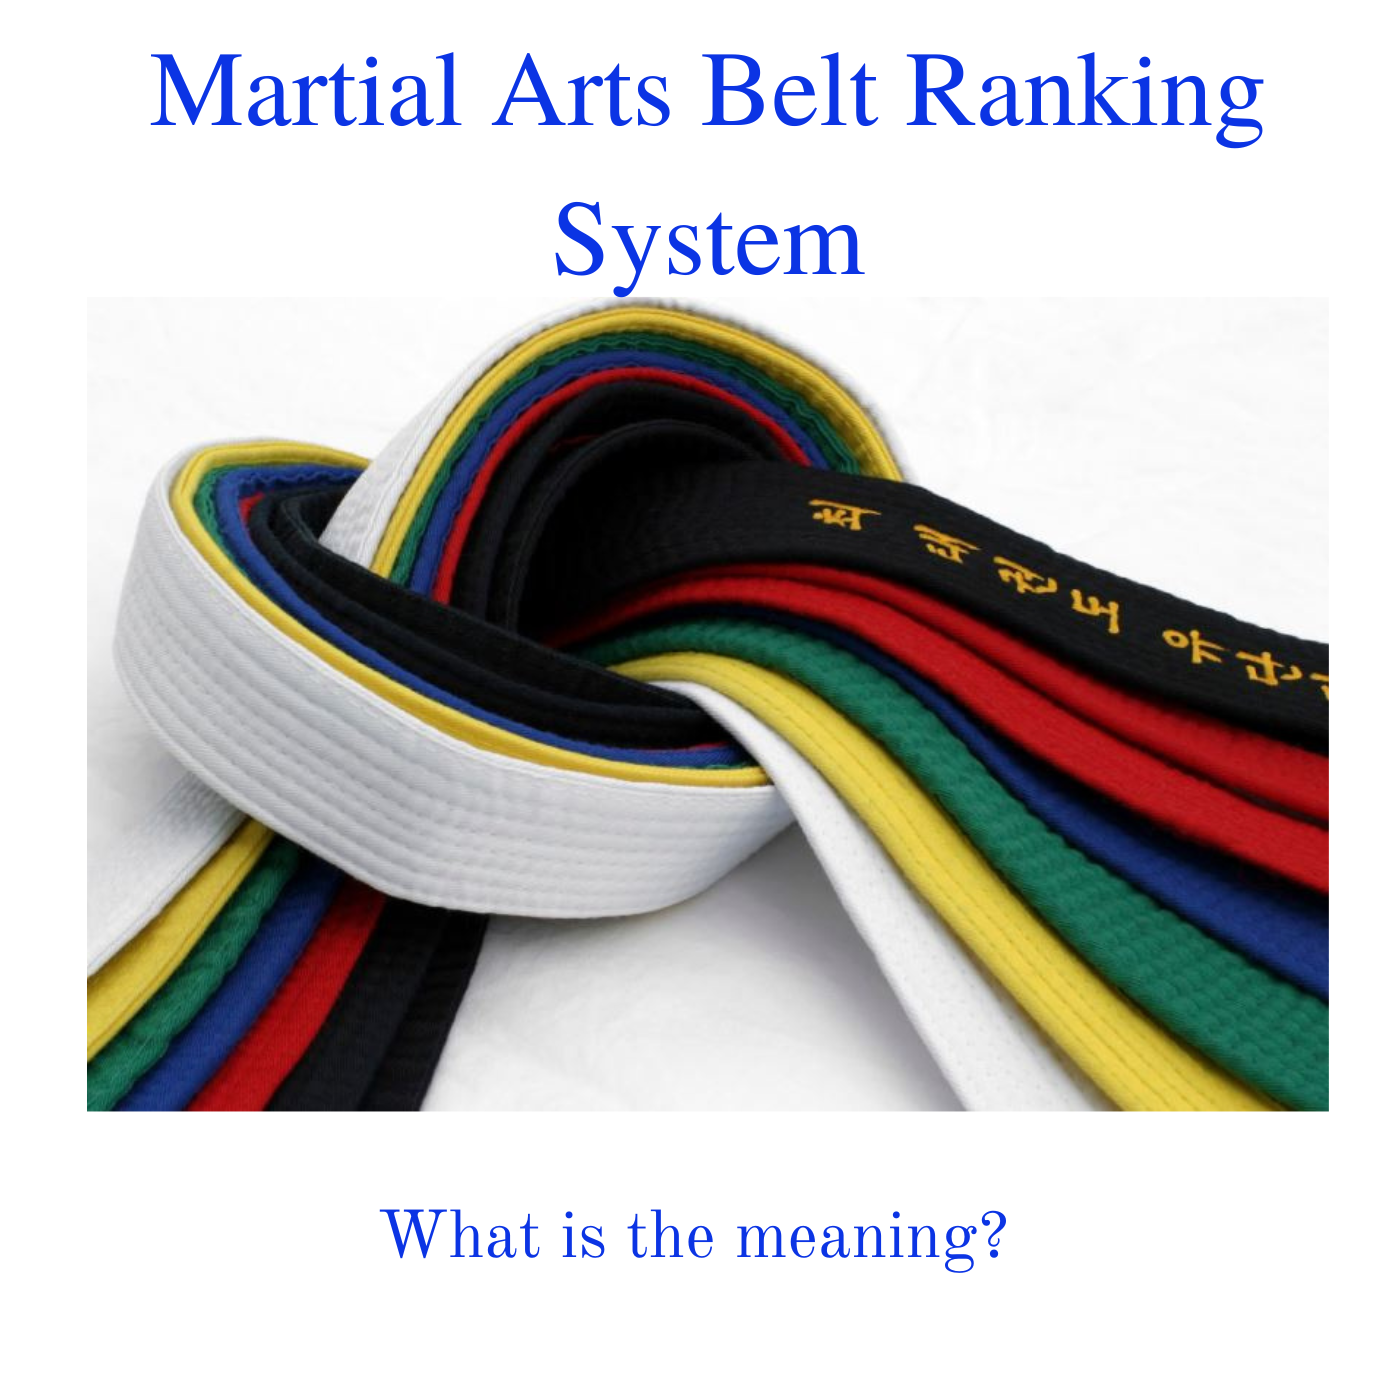 Martial Arts Belt Ranking System. What is the meaning?